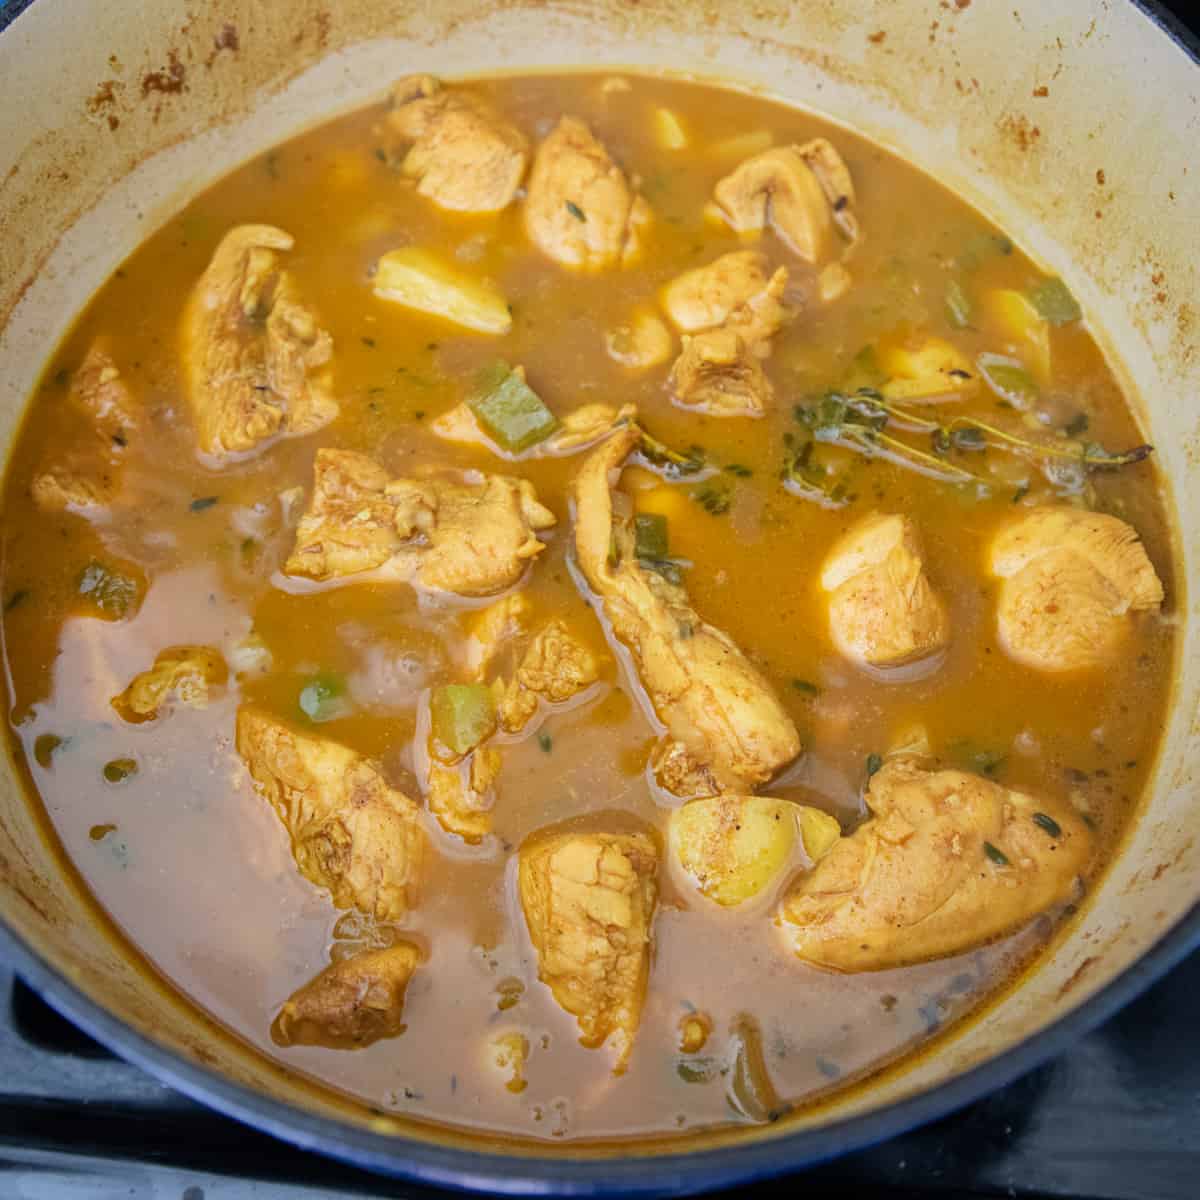 Cooked curry chicken in a dutch oven. The sauce is thickened slightly and brown in color. 